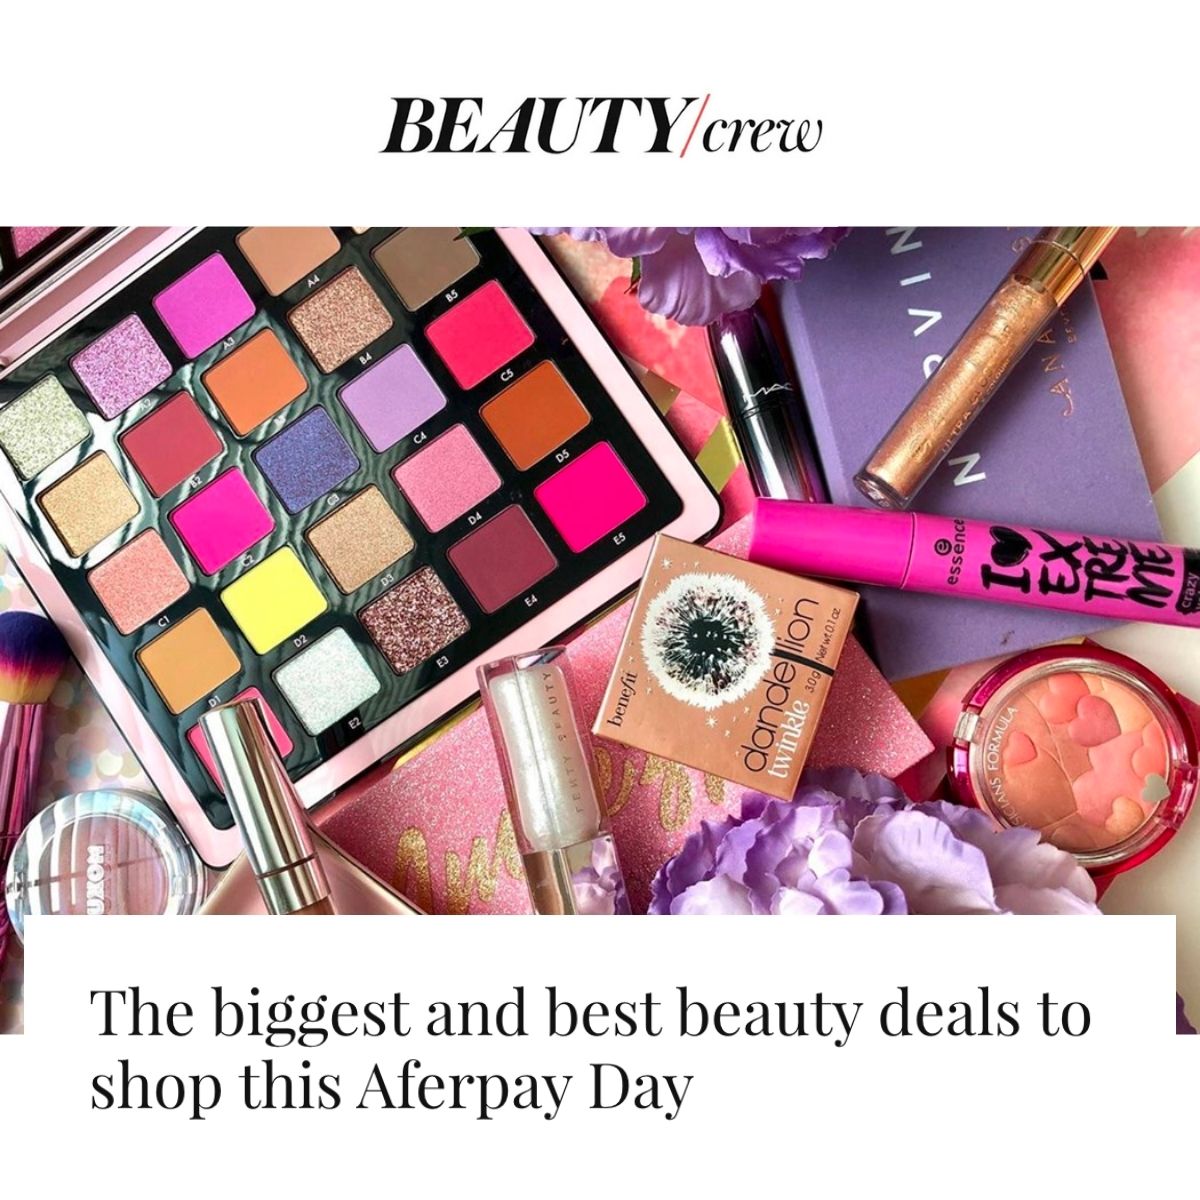 The biggest and best beauty deals to shop this Afterpay Day